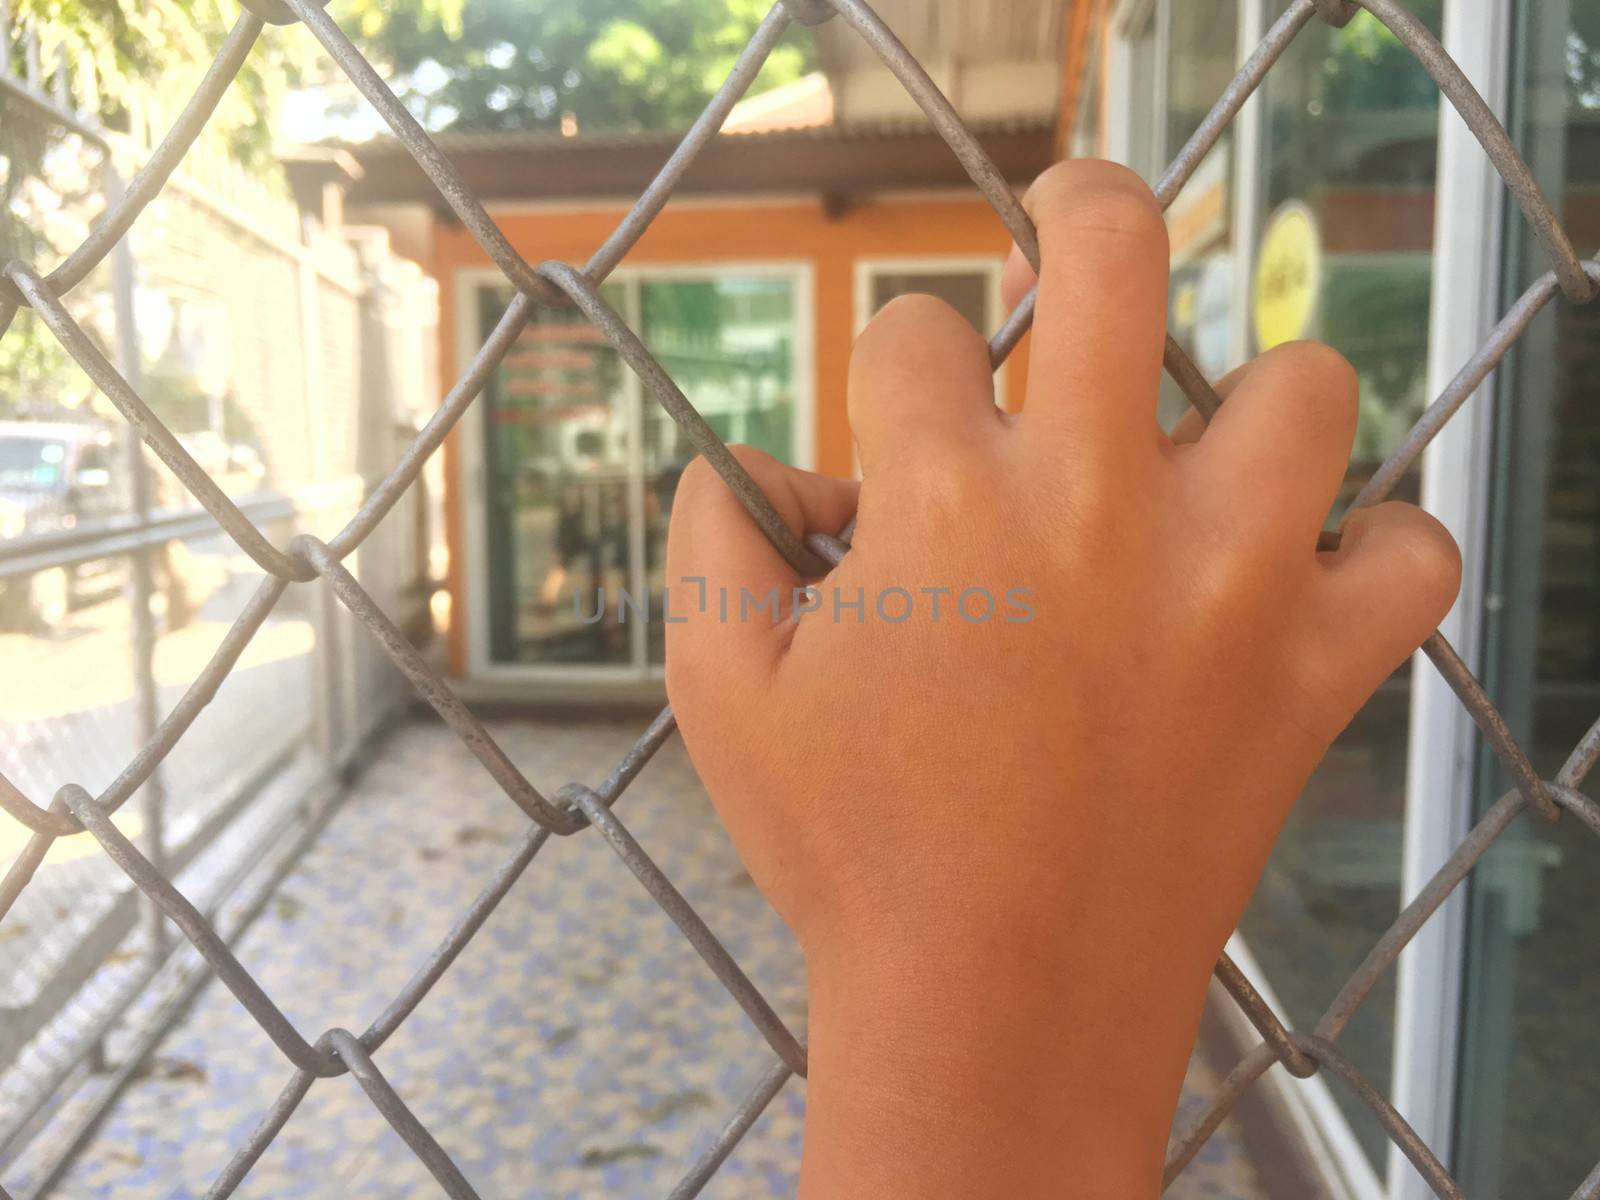 Children's hand with grille.